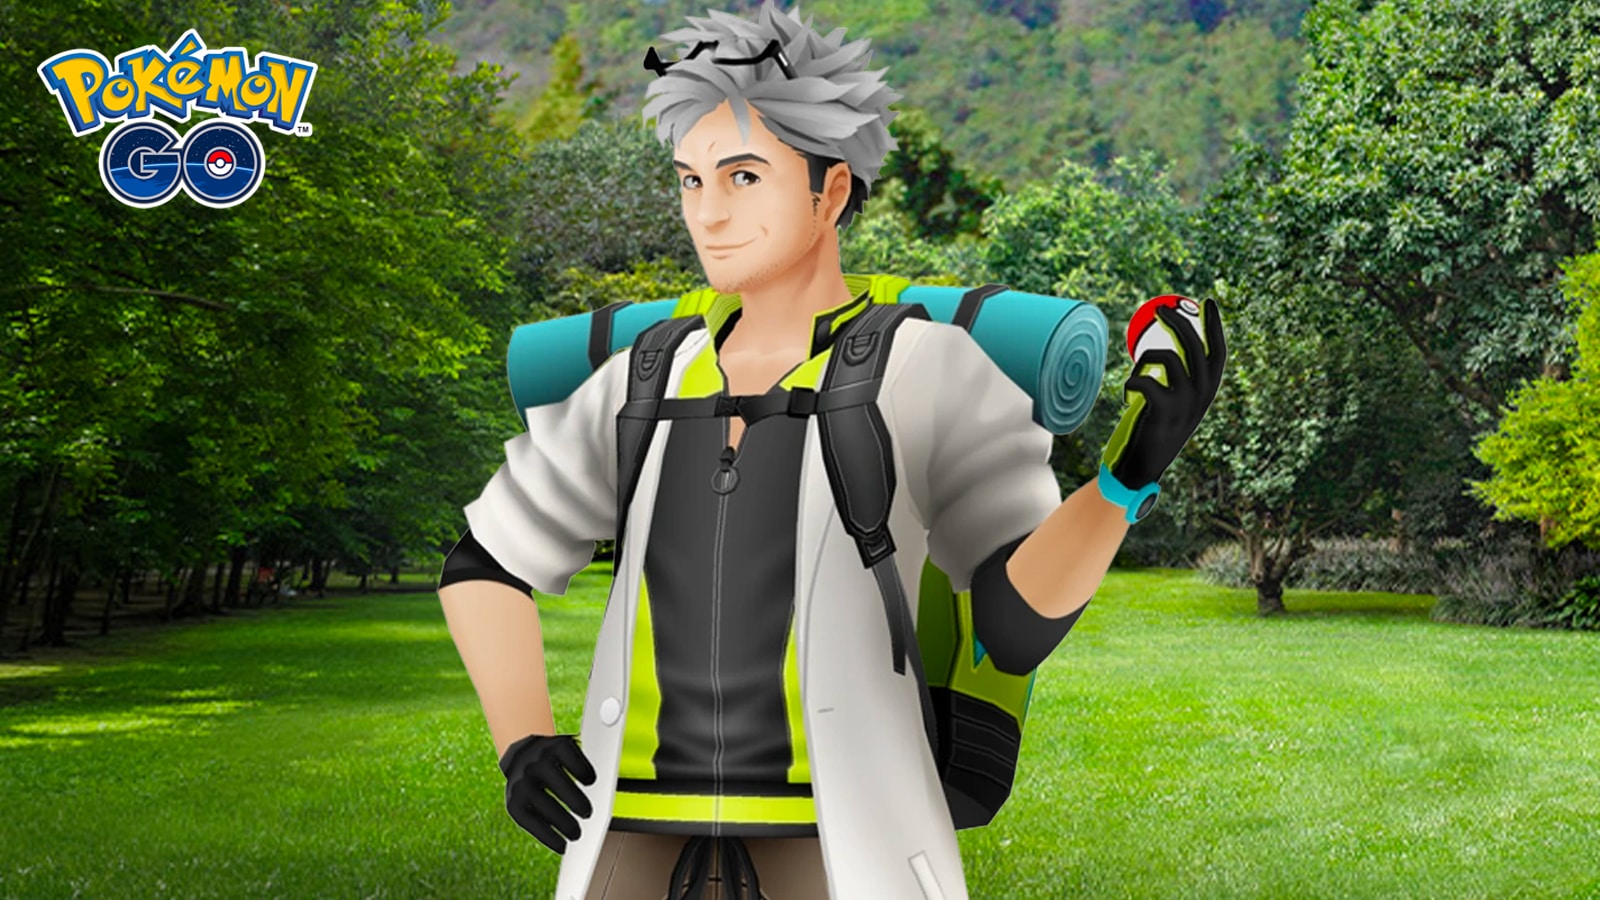 Pokemon Go Research Quests LIVE - Mew Shiny update, Professor Willow  missions, rewards, Gaming, Entertainment